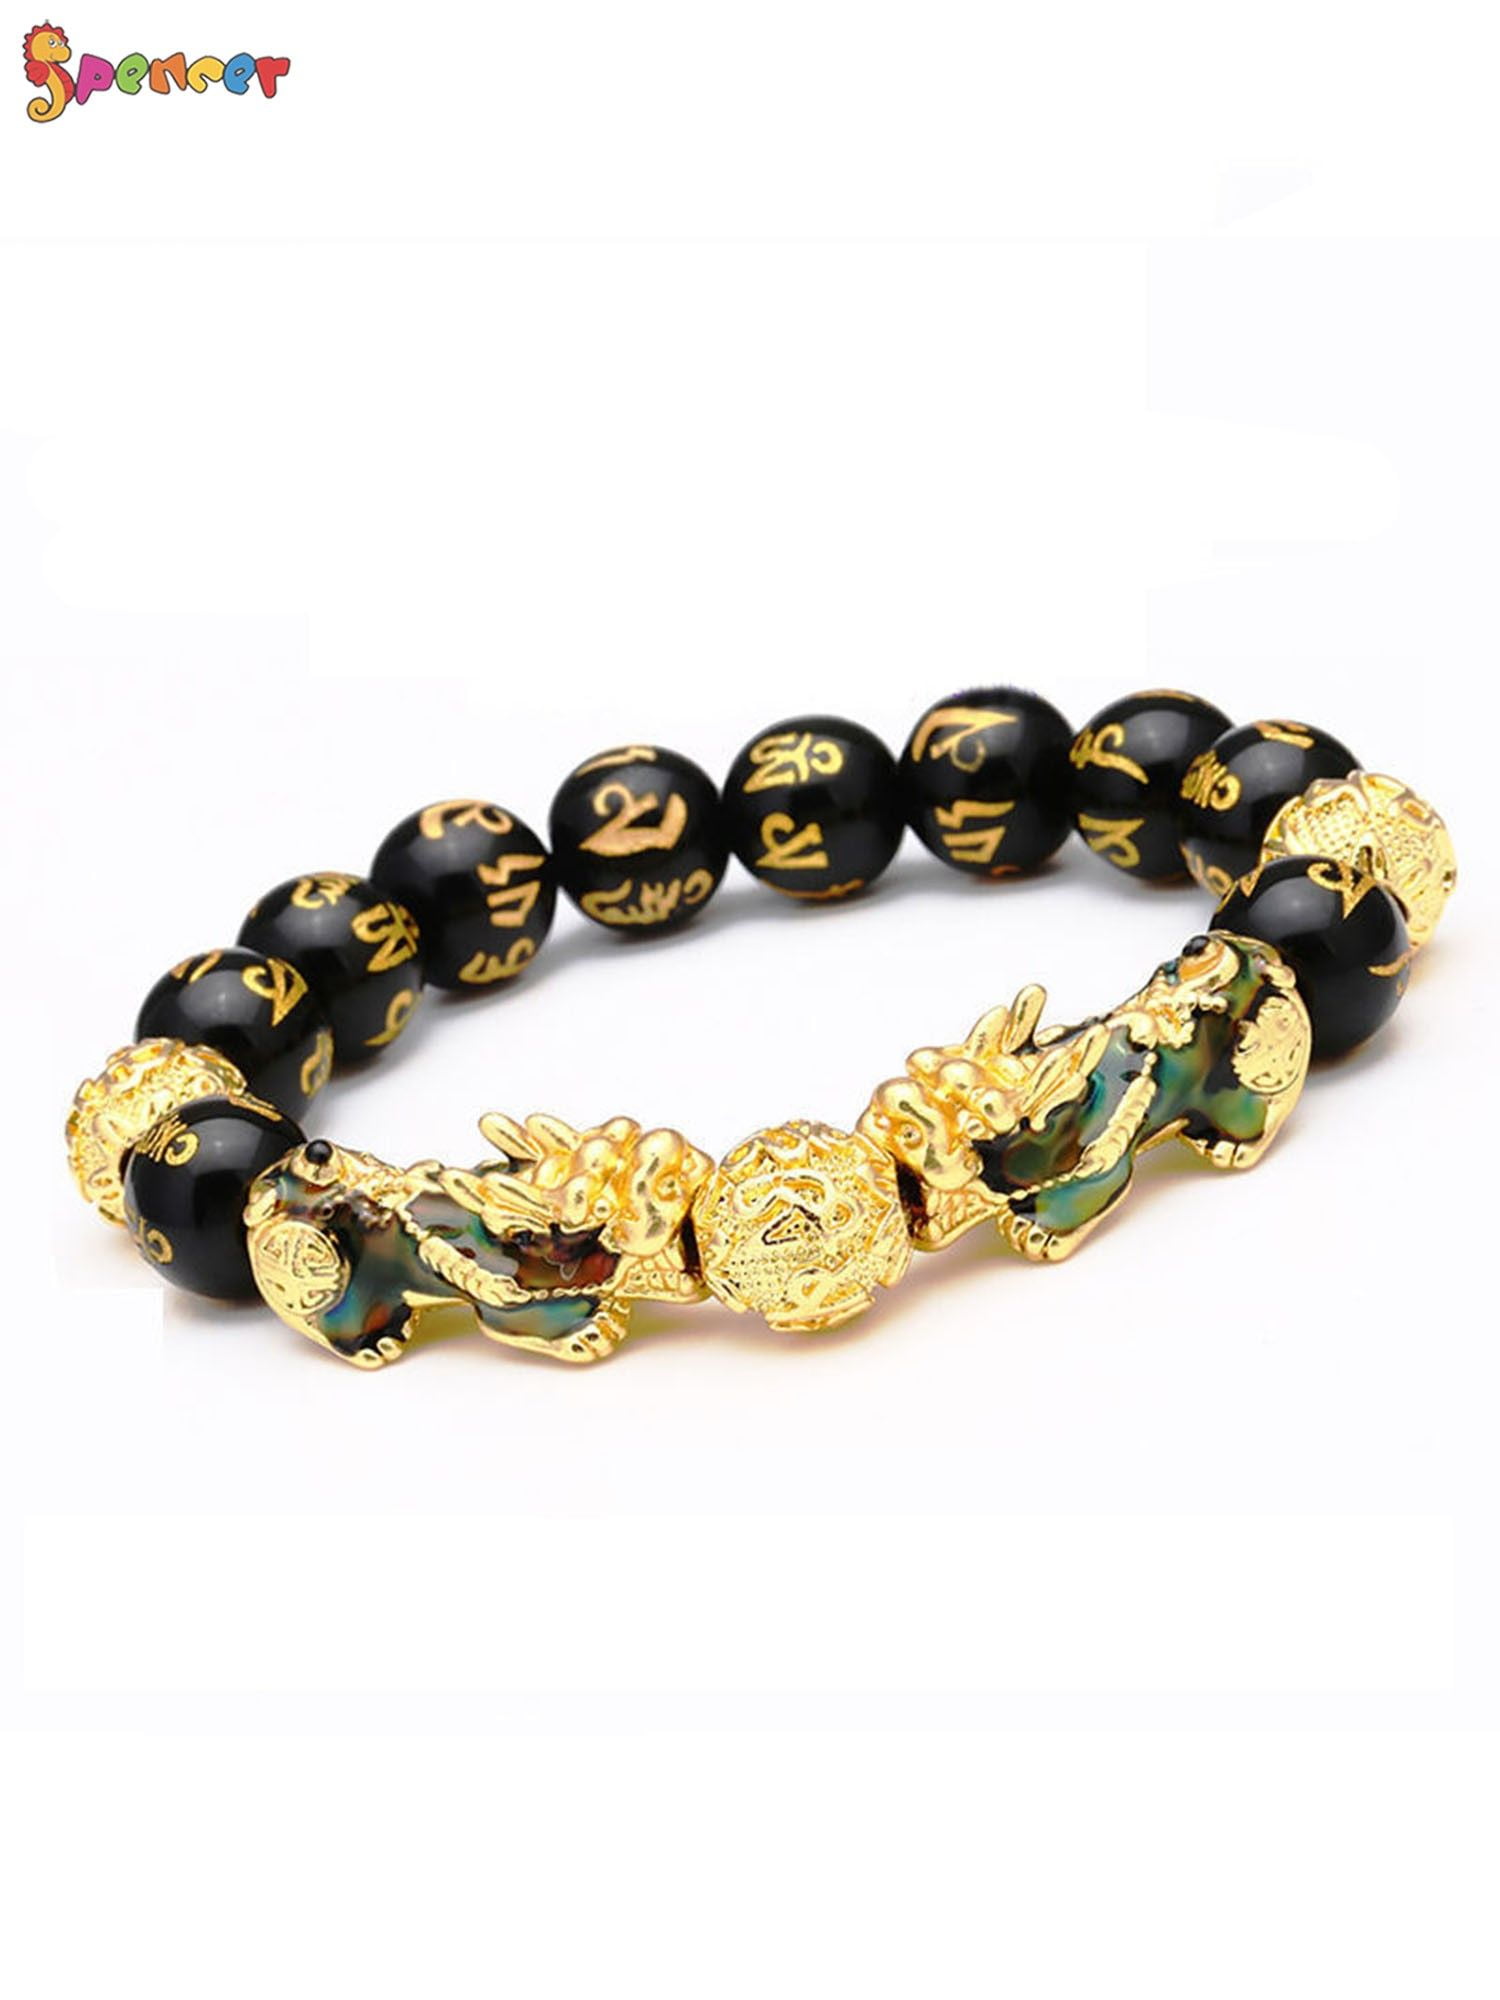 Buy Feng Shui Double Good Luck Charm Piyao Pixiu Bracelet 12mm Online in  India - Etsy